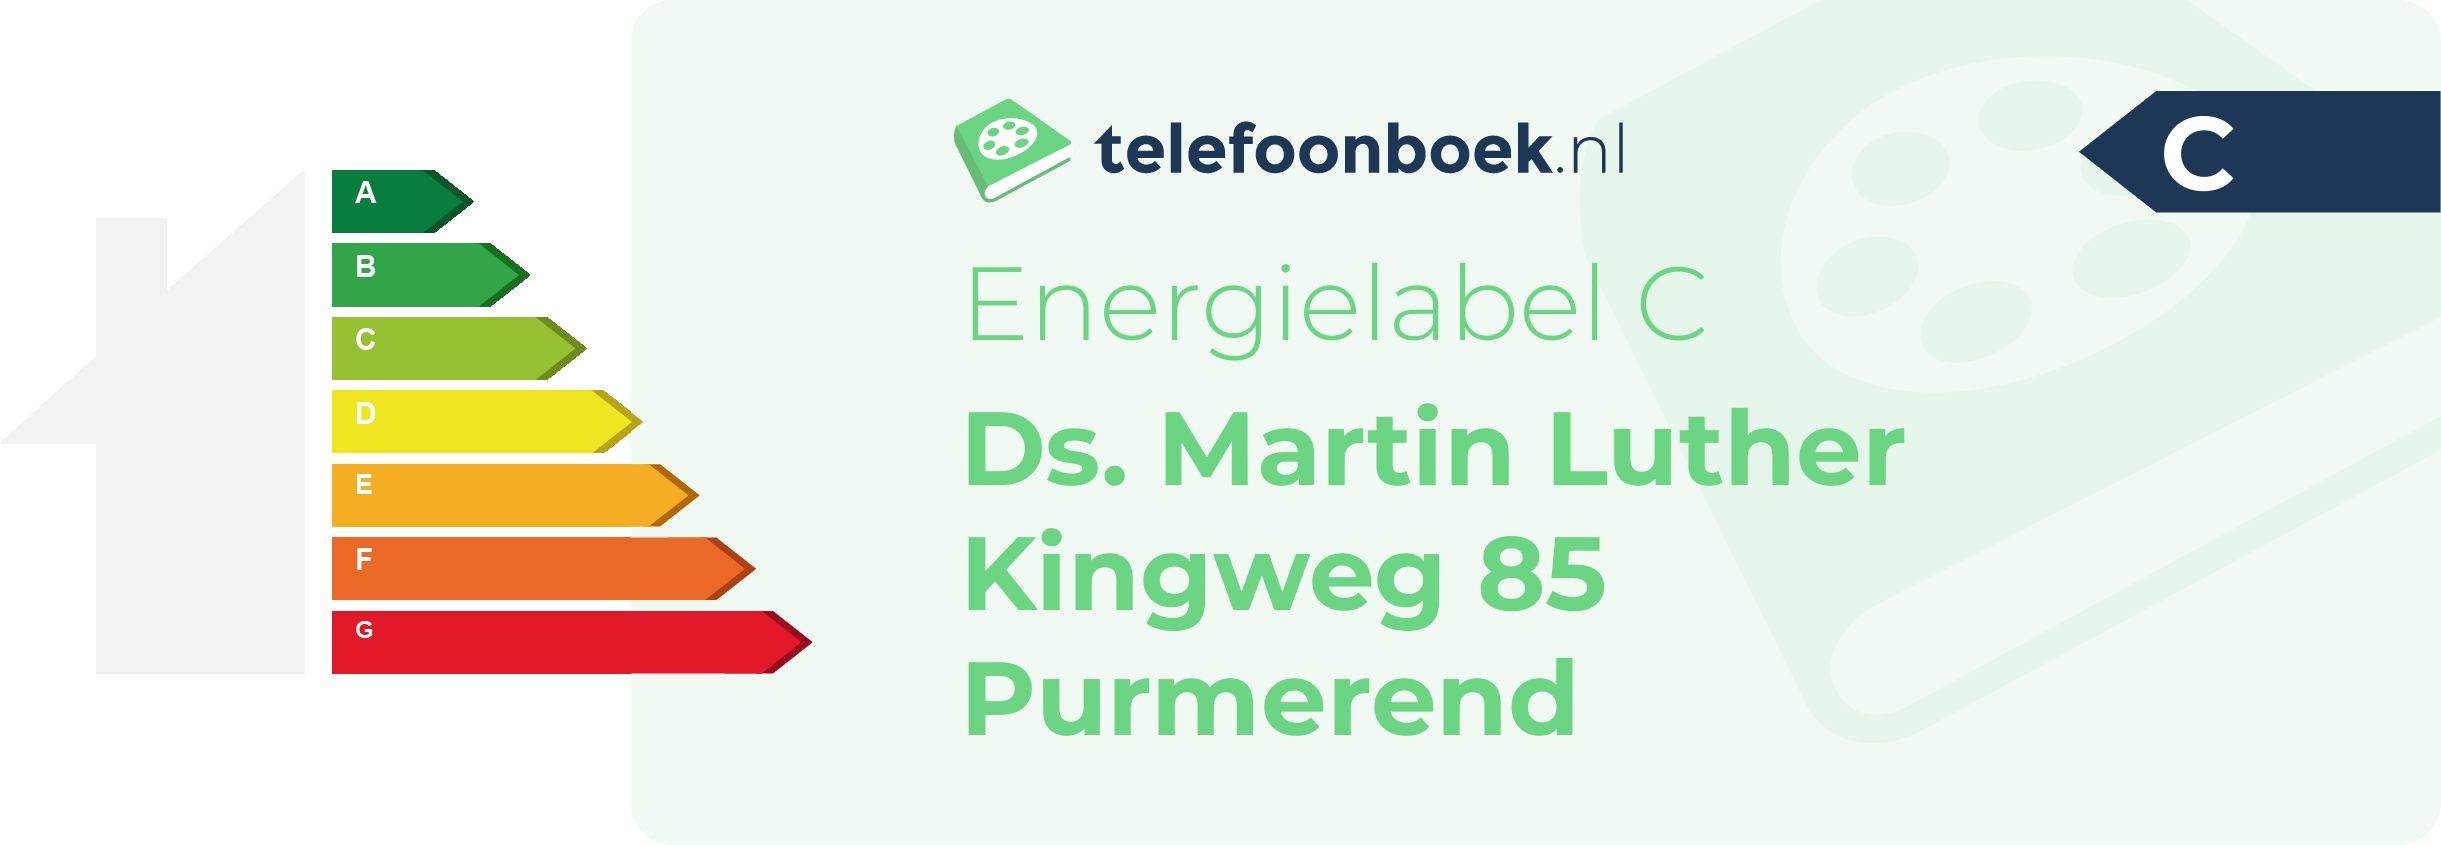 Energielabel Ds. Martin Luther Kingweg 85 Purmerend